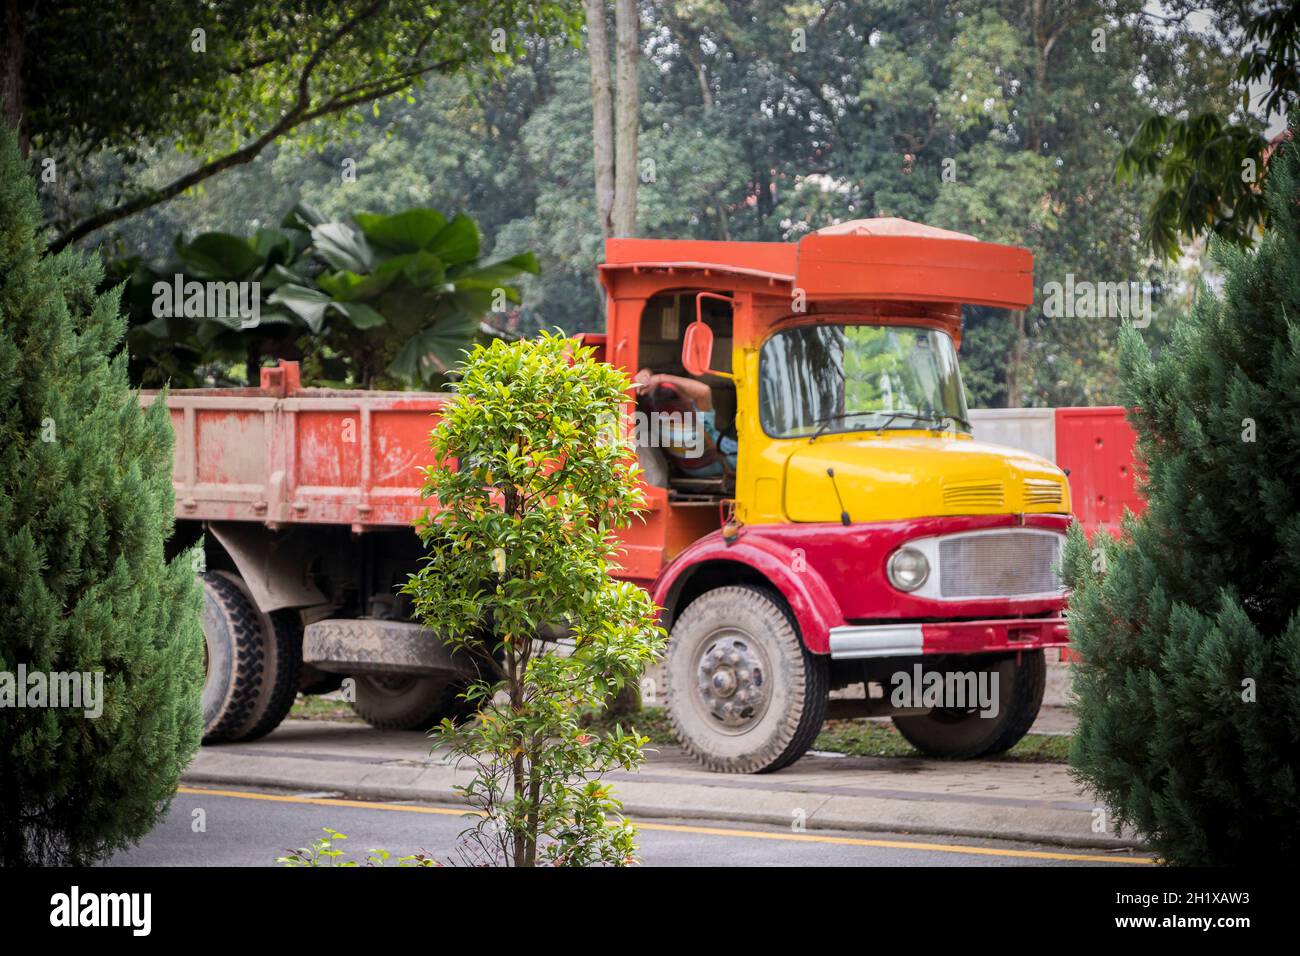 Driver sleeps in an old Asian truck made of wood in red and yellow. Kuala Lumpur, Malaysia. Stock Photo